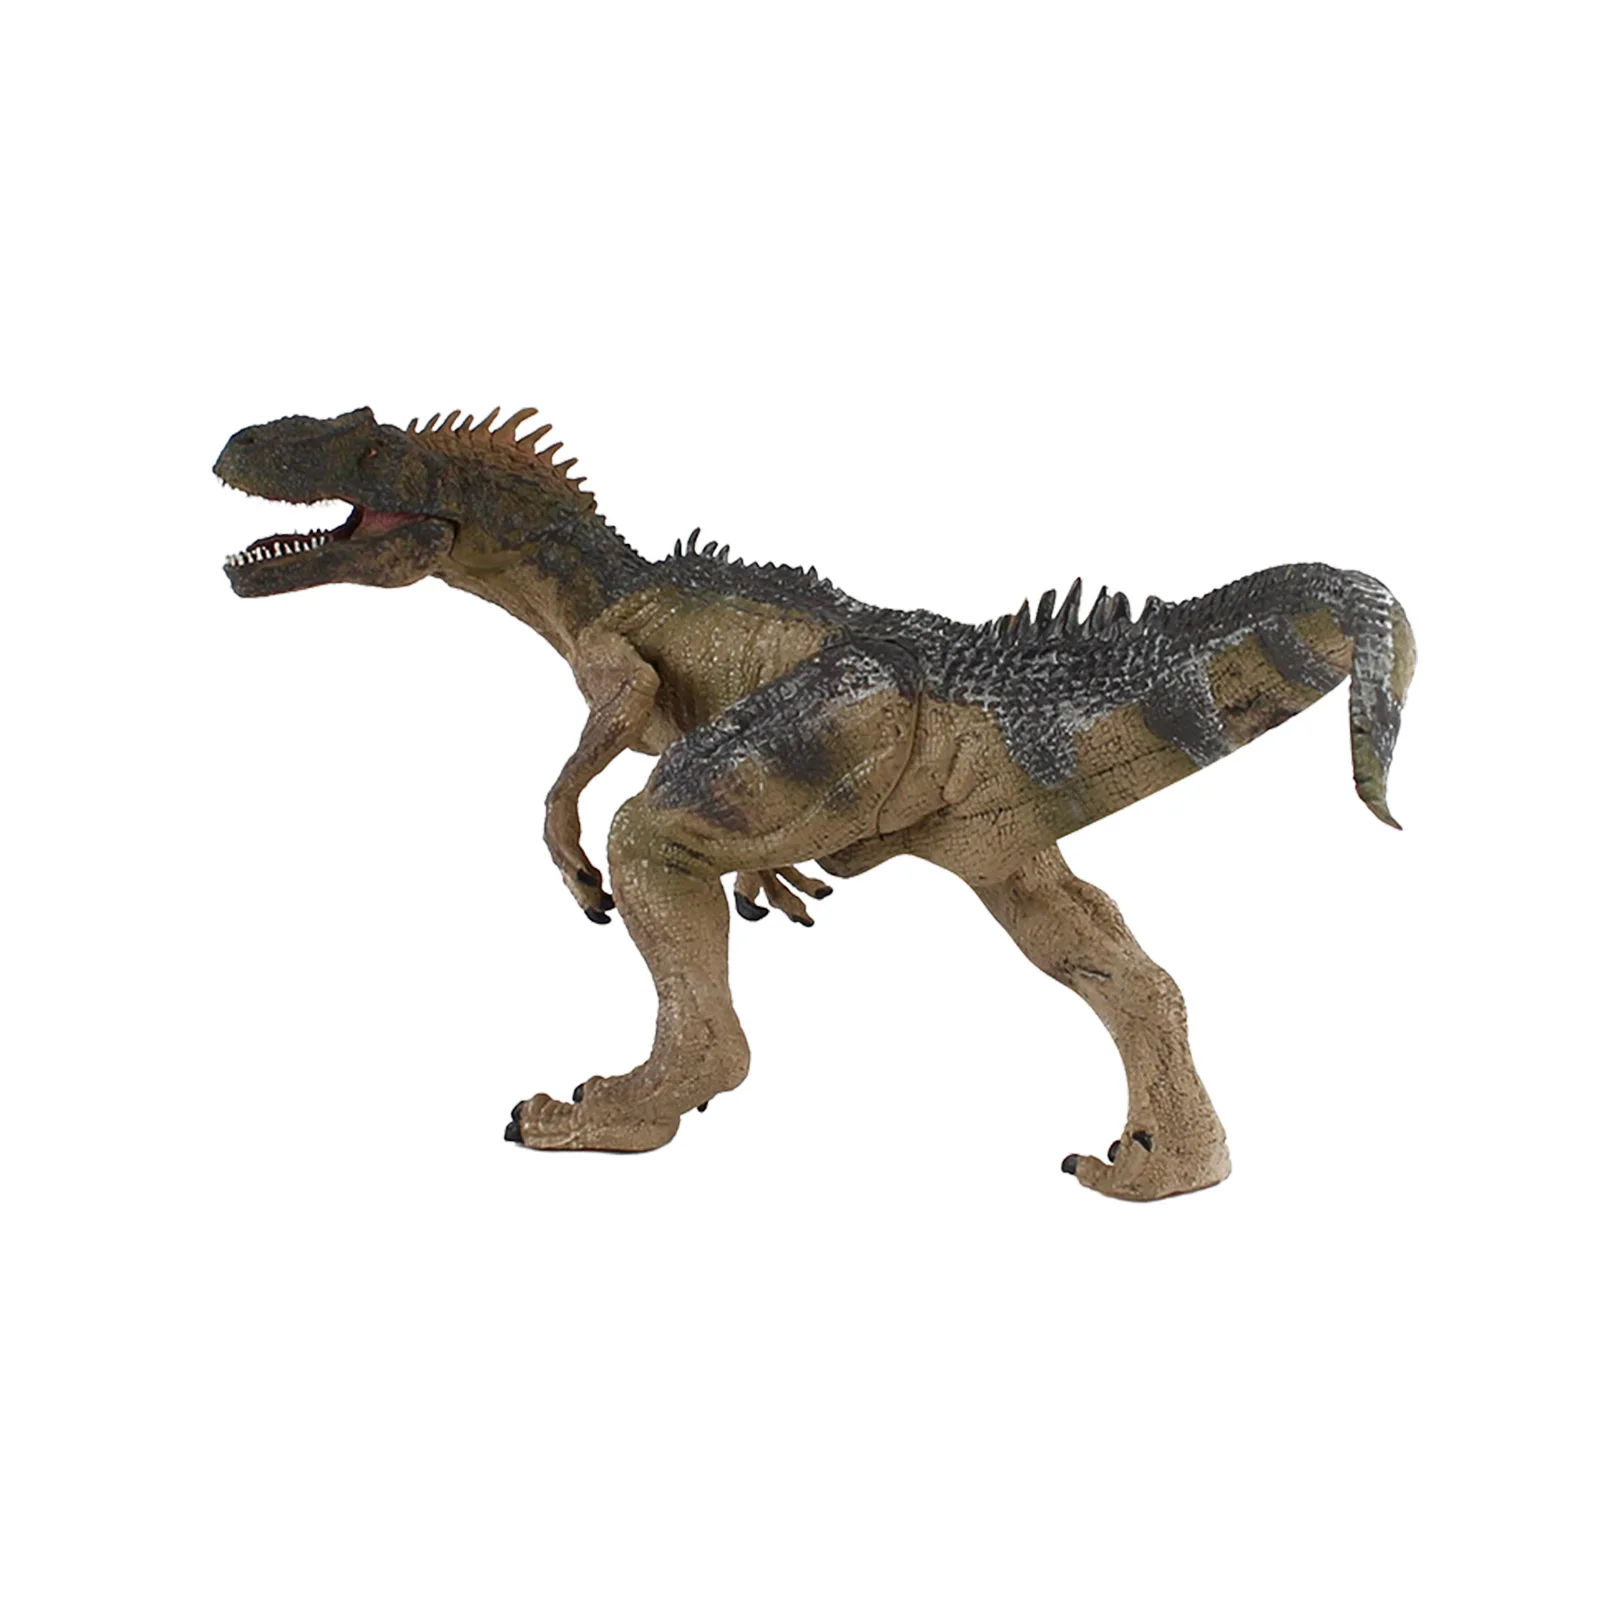 

Jurrassic World Dinosaur Realistic Dinosaur Figures Simulated Dinosaur Models With Movable Mouth STEM Educational Realistic